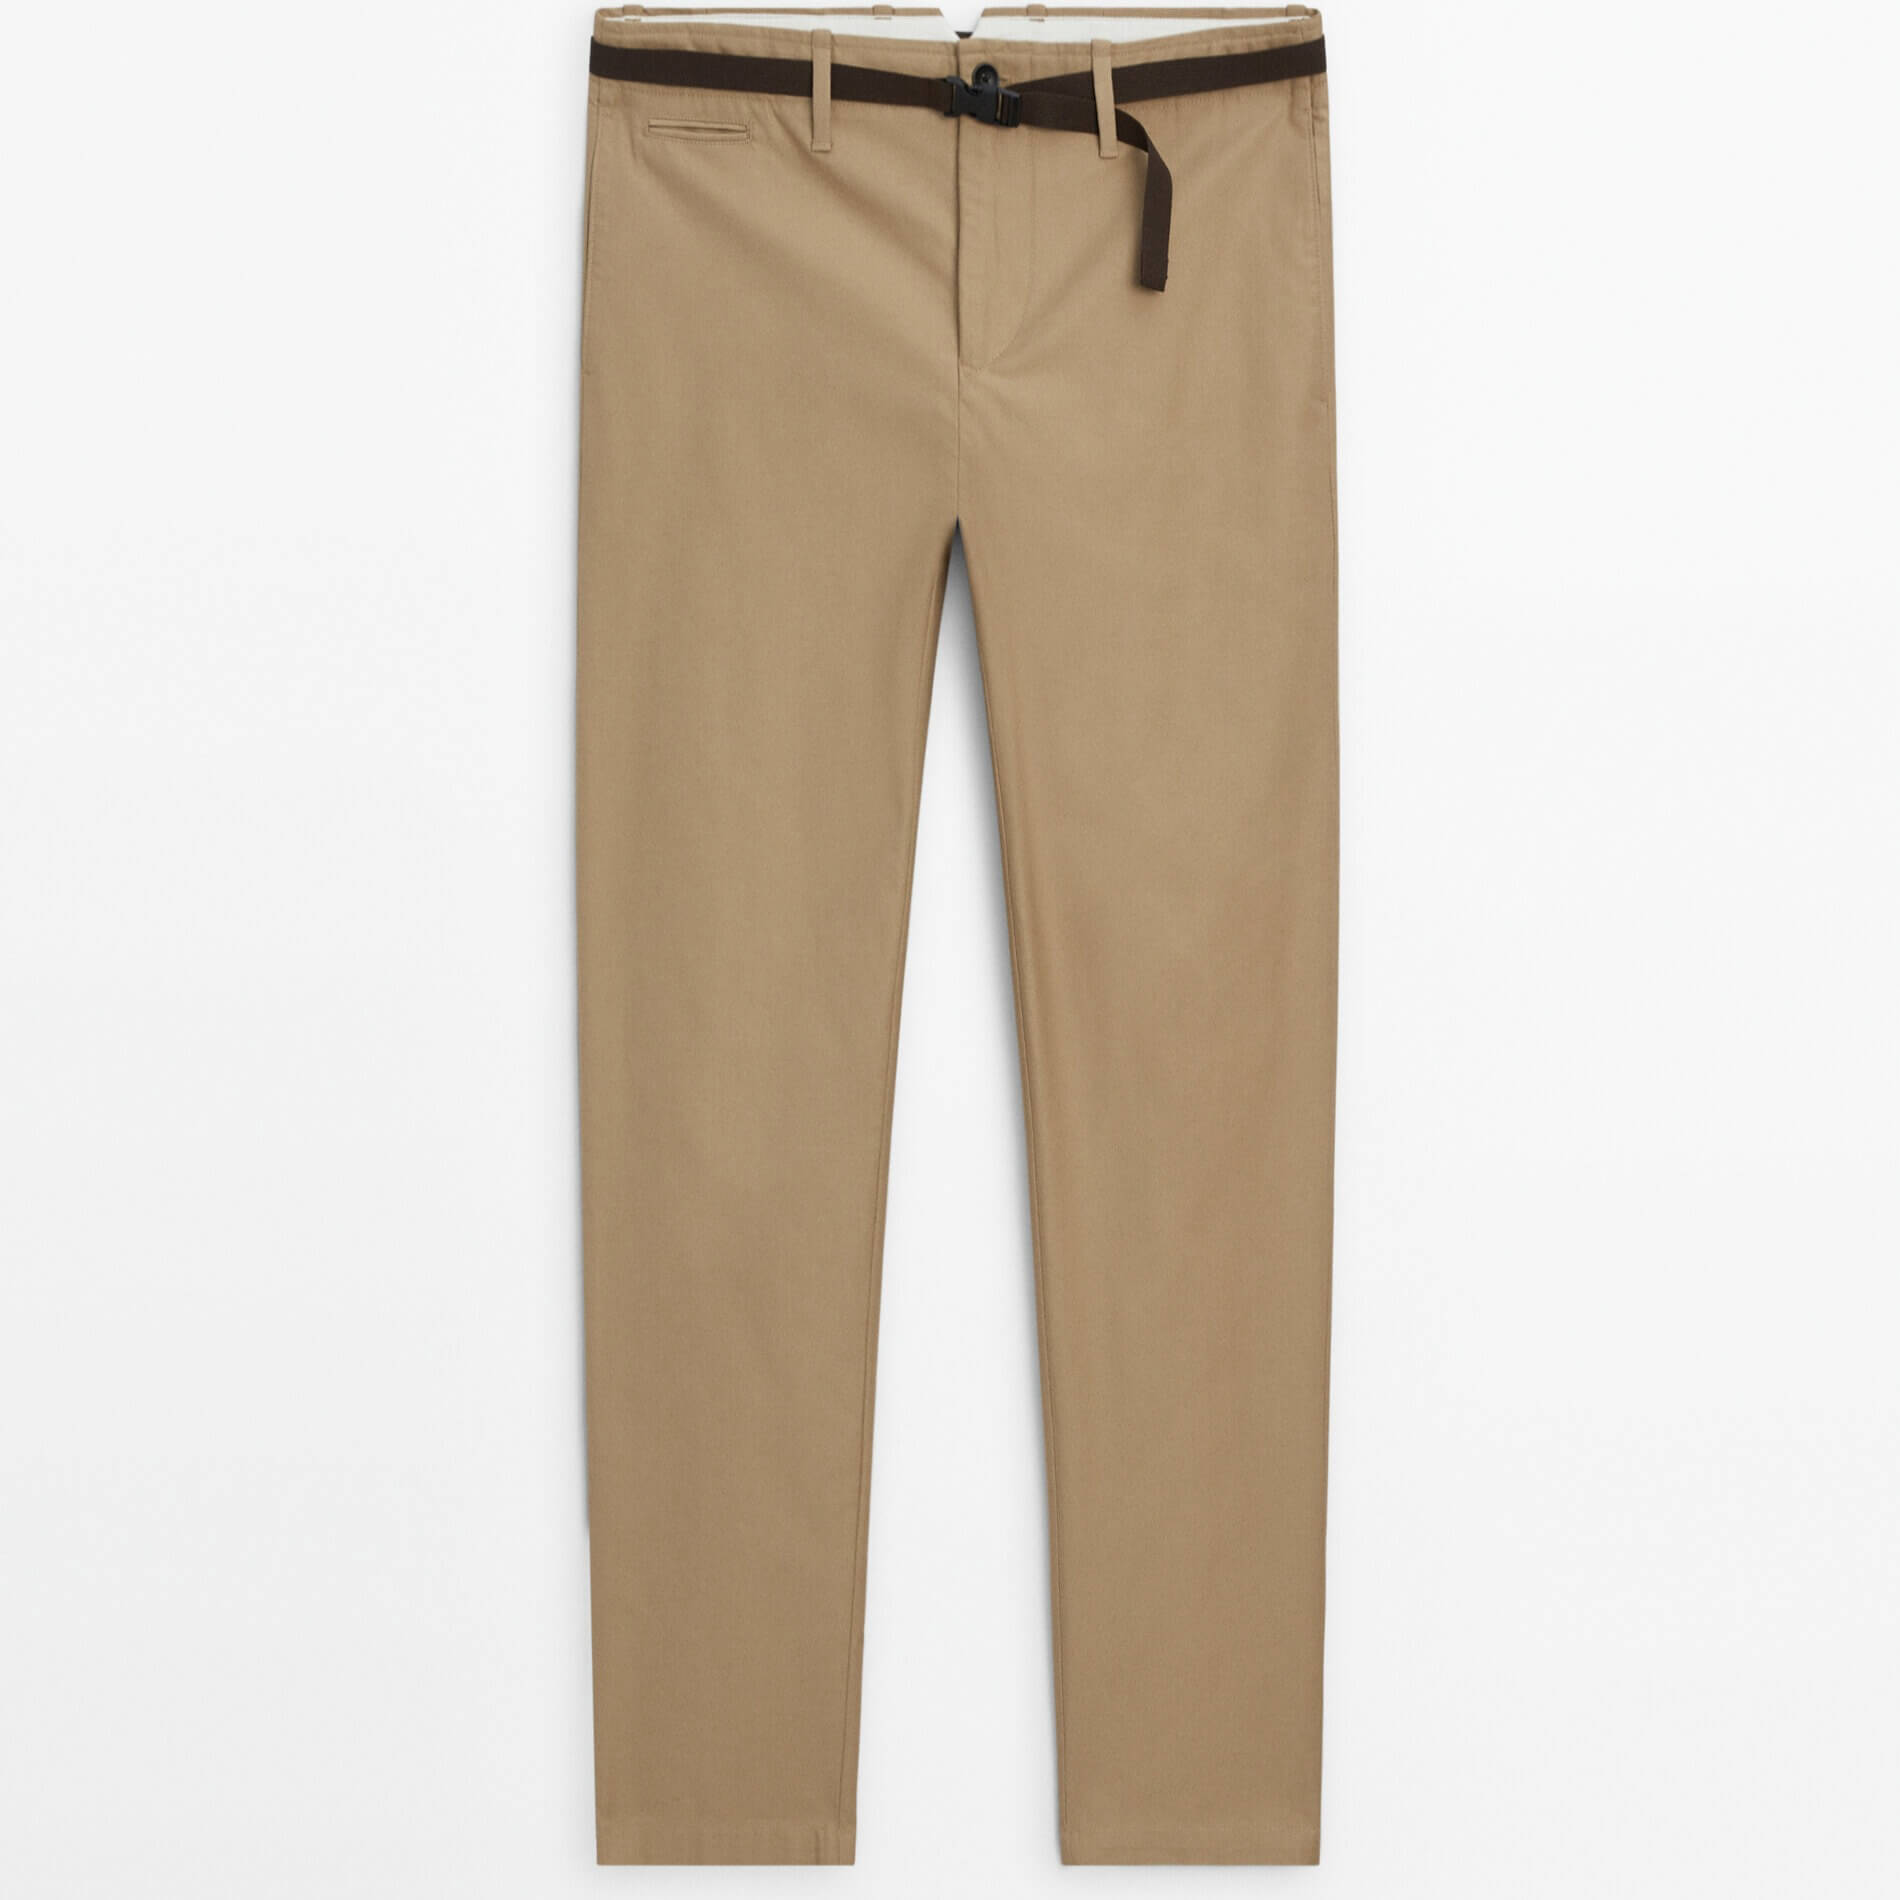 Брюки Massimo Dutti Relaxed Fit Belted Chino, бежевый брюки чинос massimo dutti relaxed fit wool limited edition тёмно синий размер s